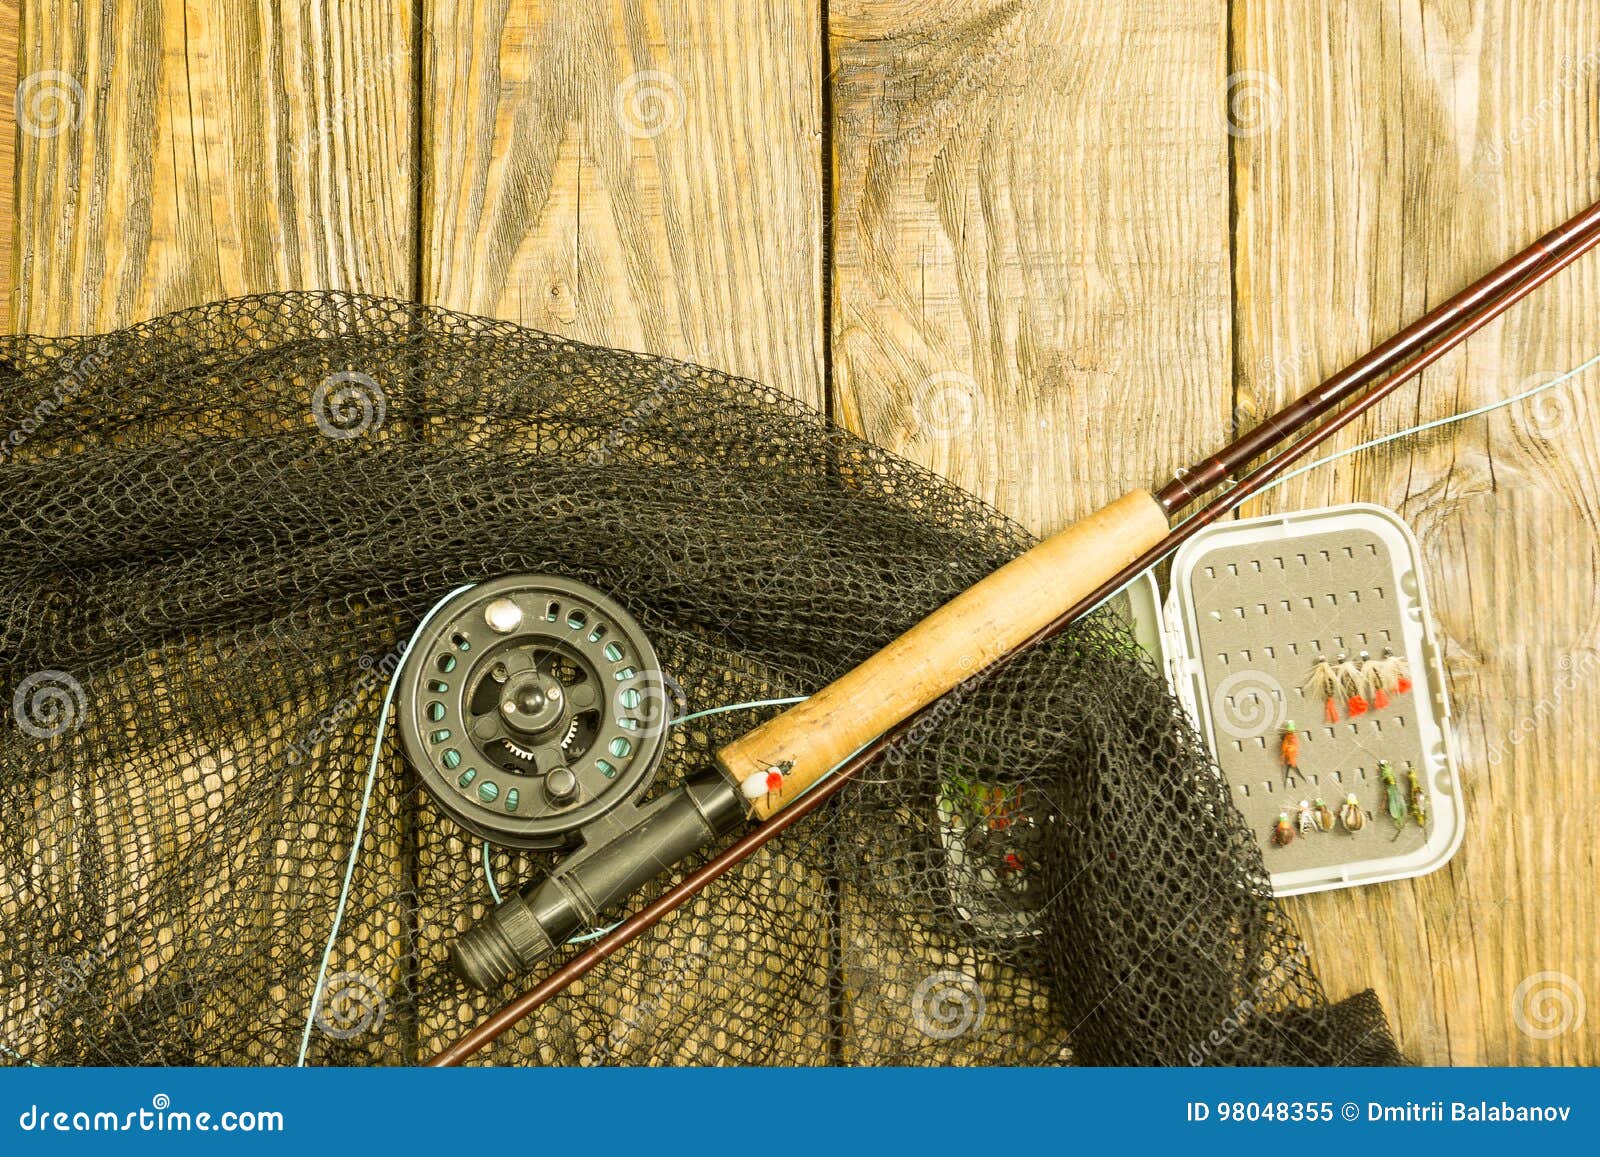 Fly Fishing Rod ,flie and a Landing Net on the Old Wooden Table. All Ready  for Fishing. Stock Image - Image of outdoor, flie: 98048355